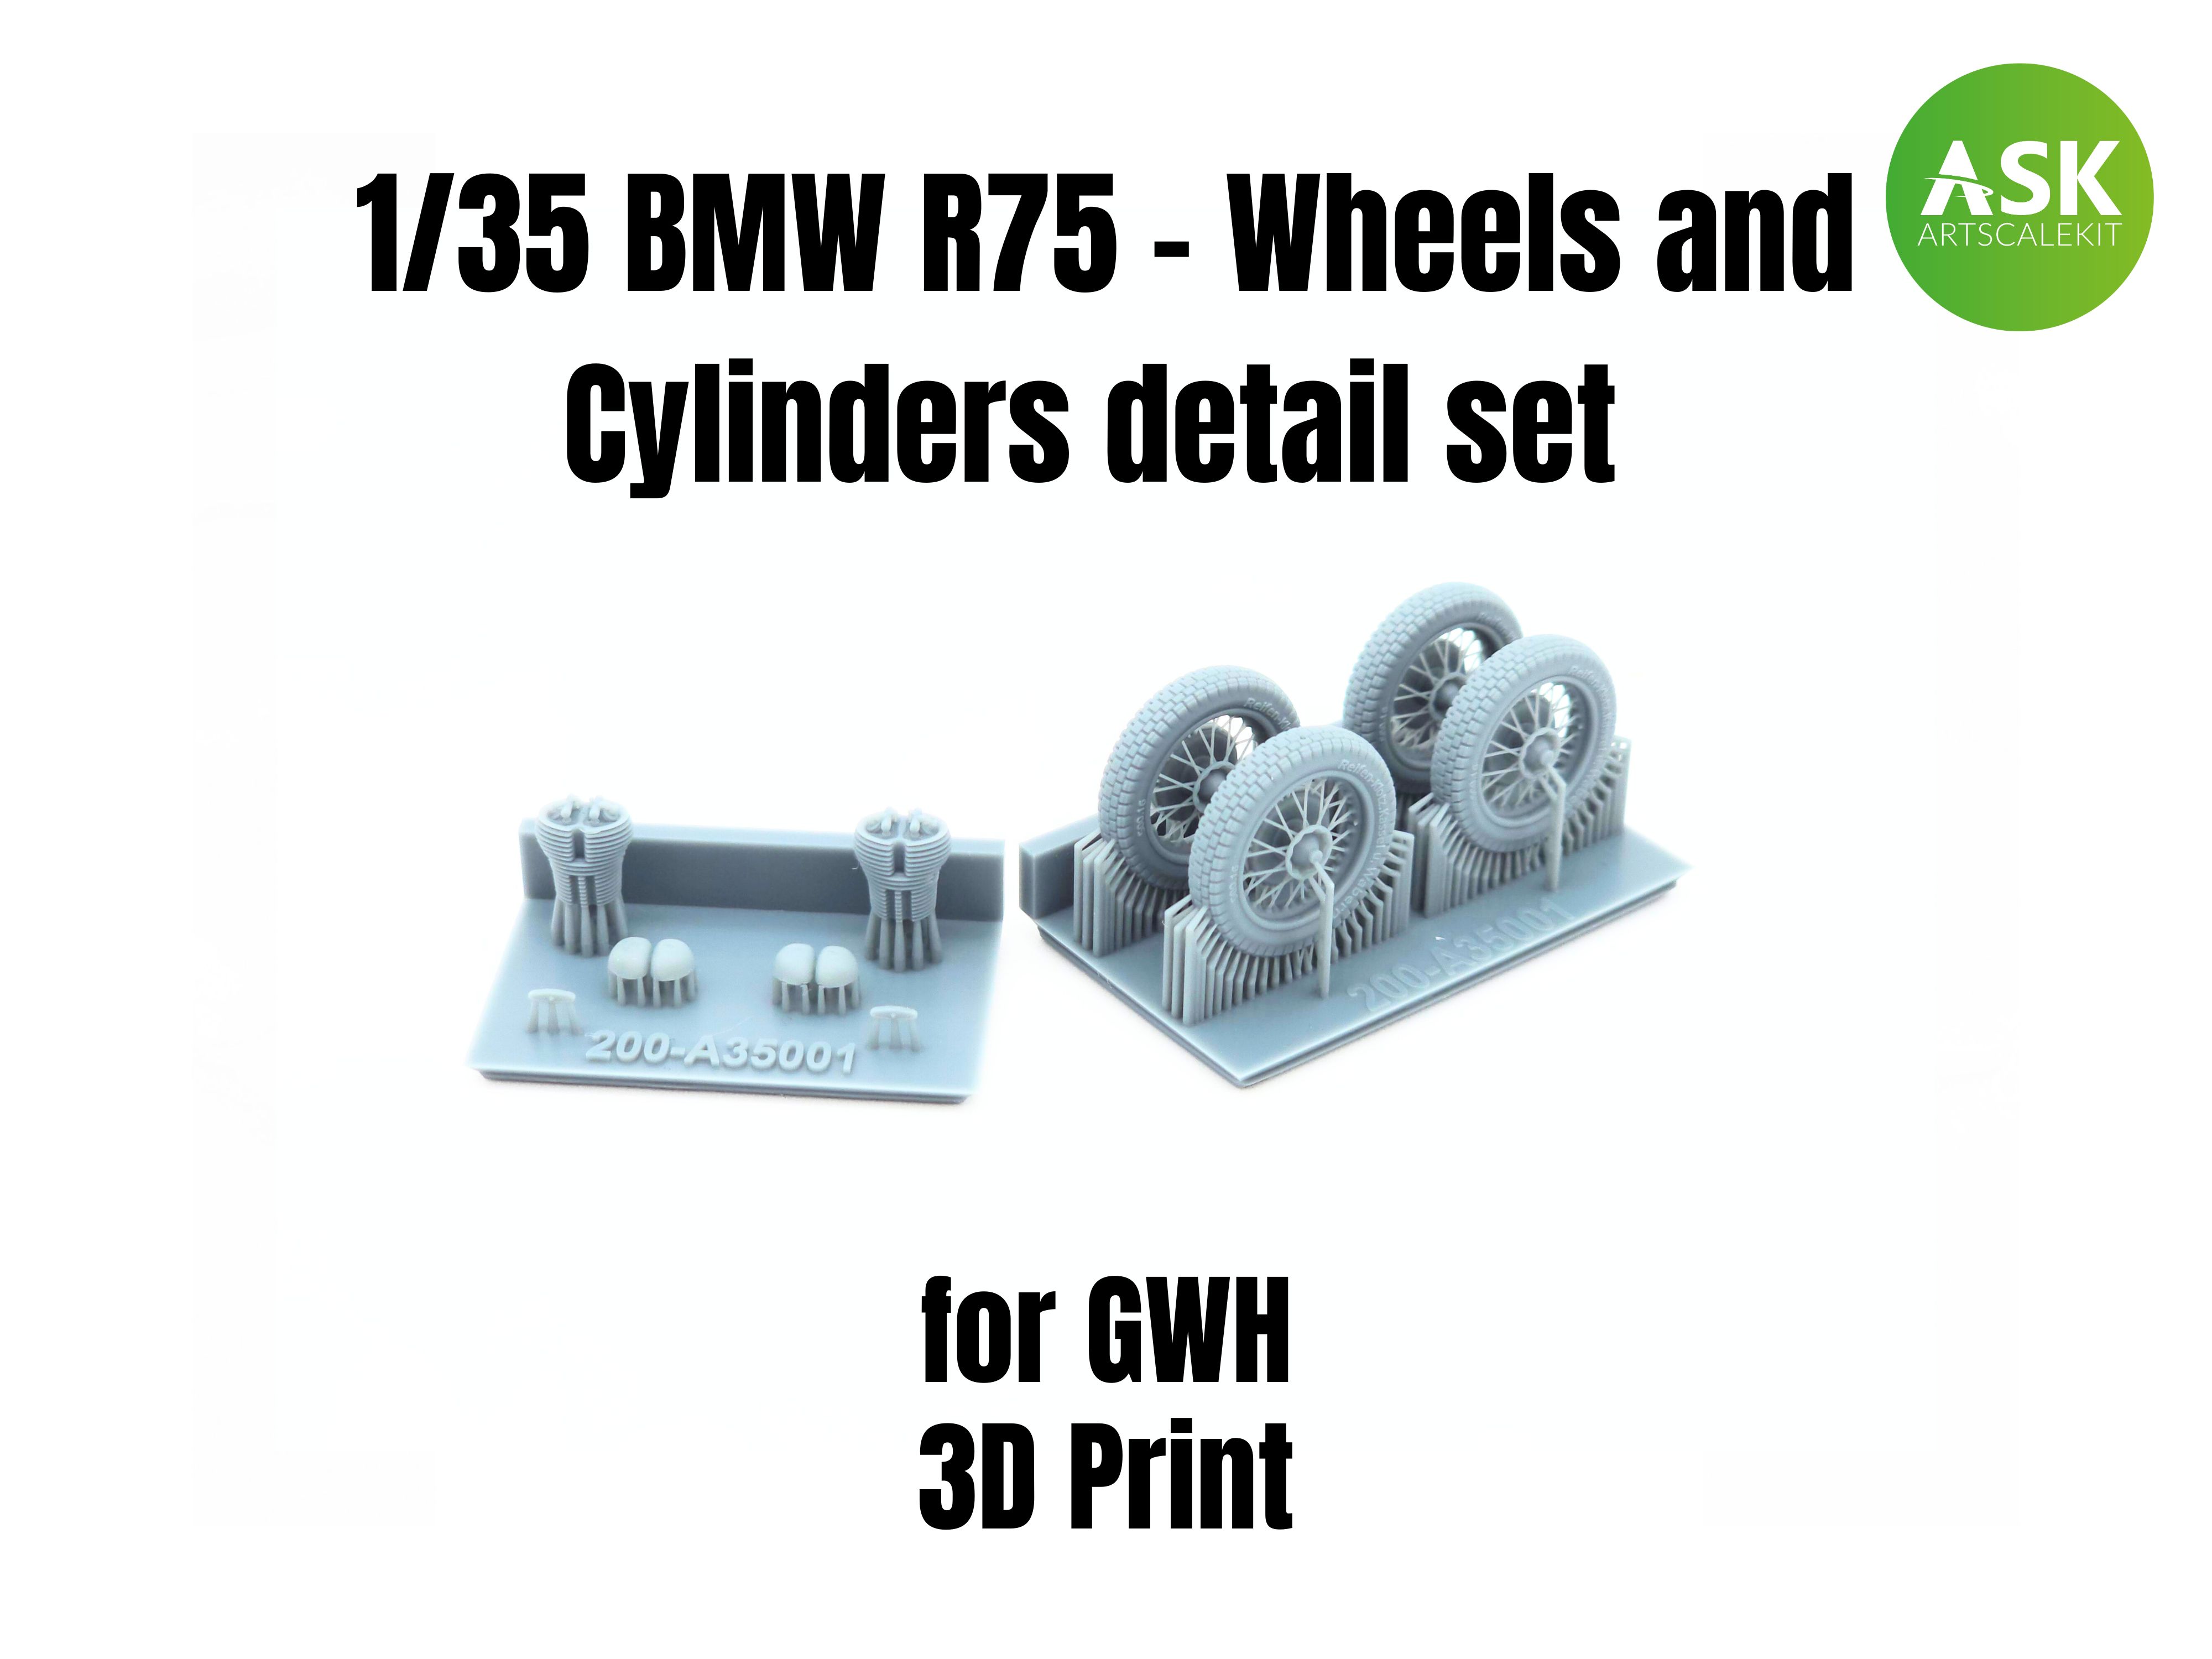 1/35 BMW R75 - Wheels and Cylinders detail set recommended for GWH